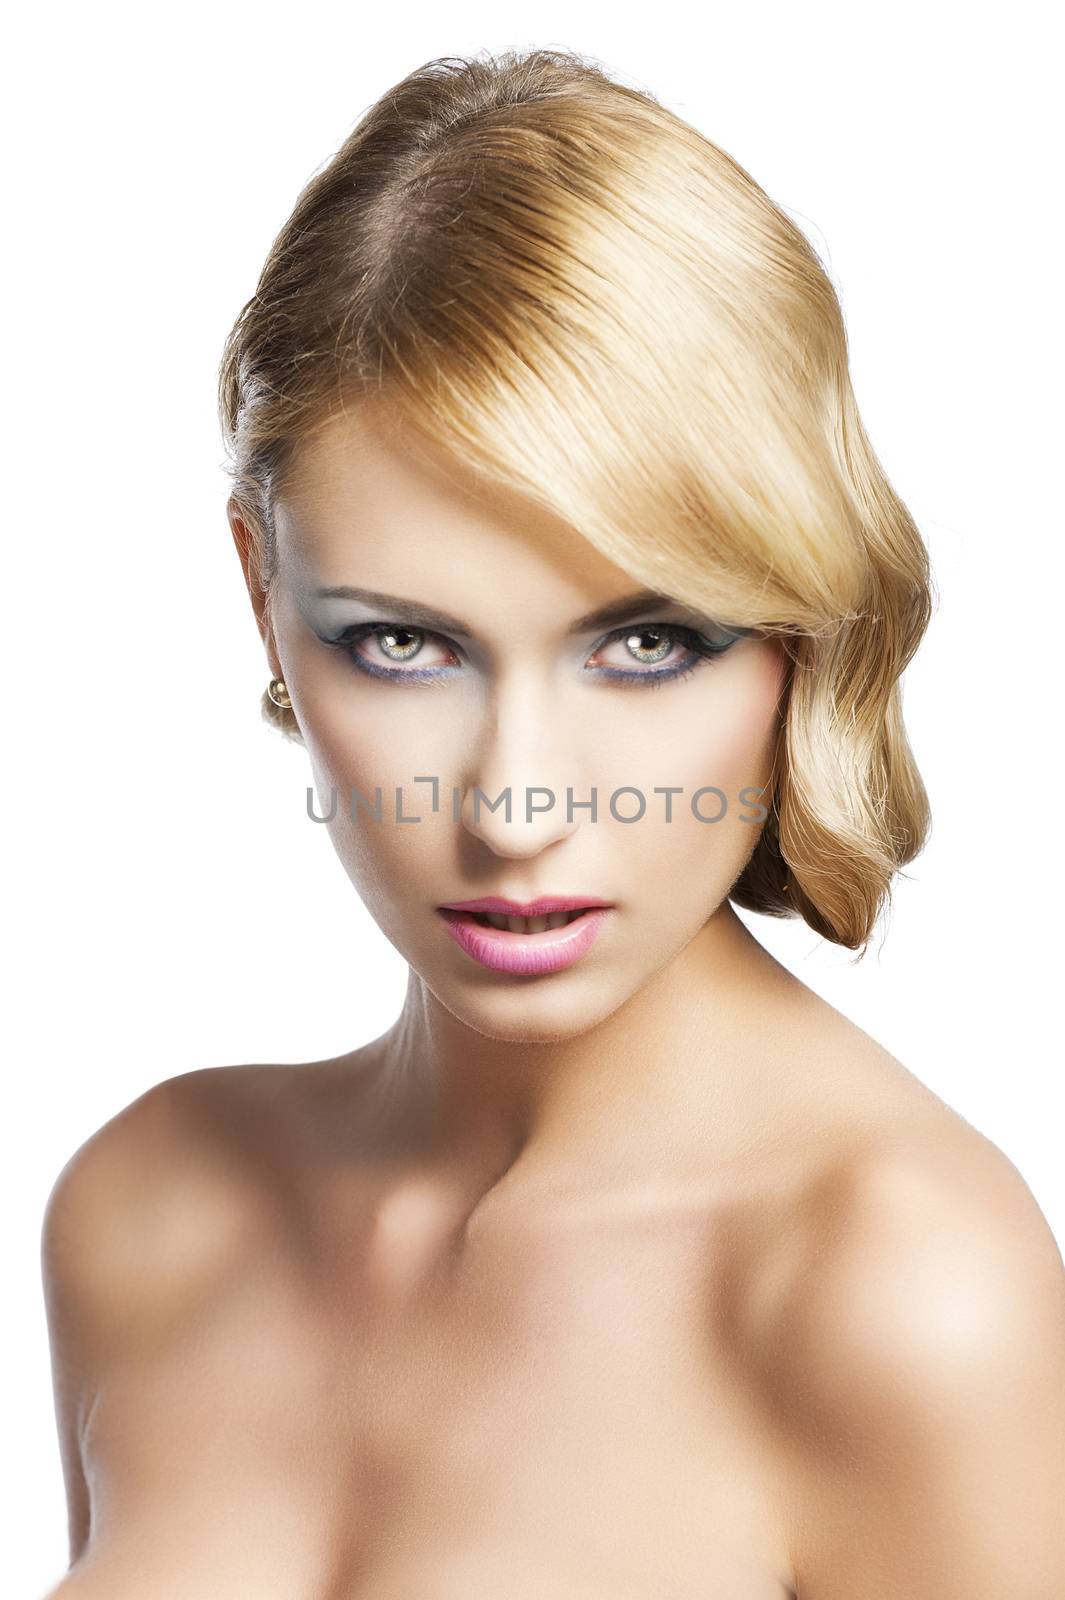 blond vintage girl portrait, she has actractive expression by fotoCD